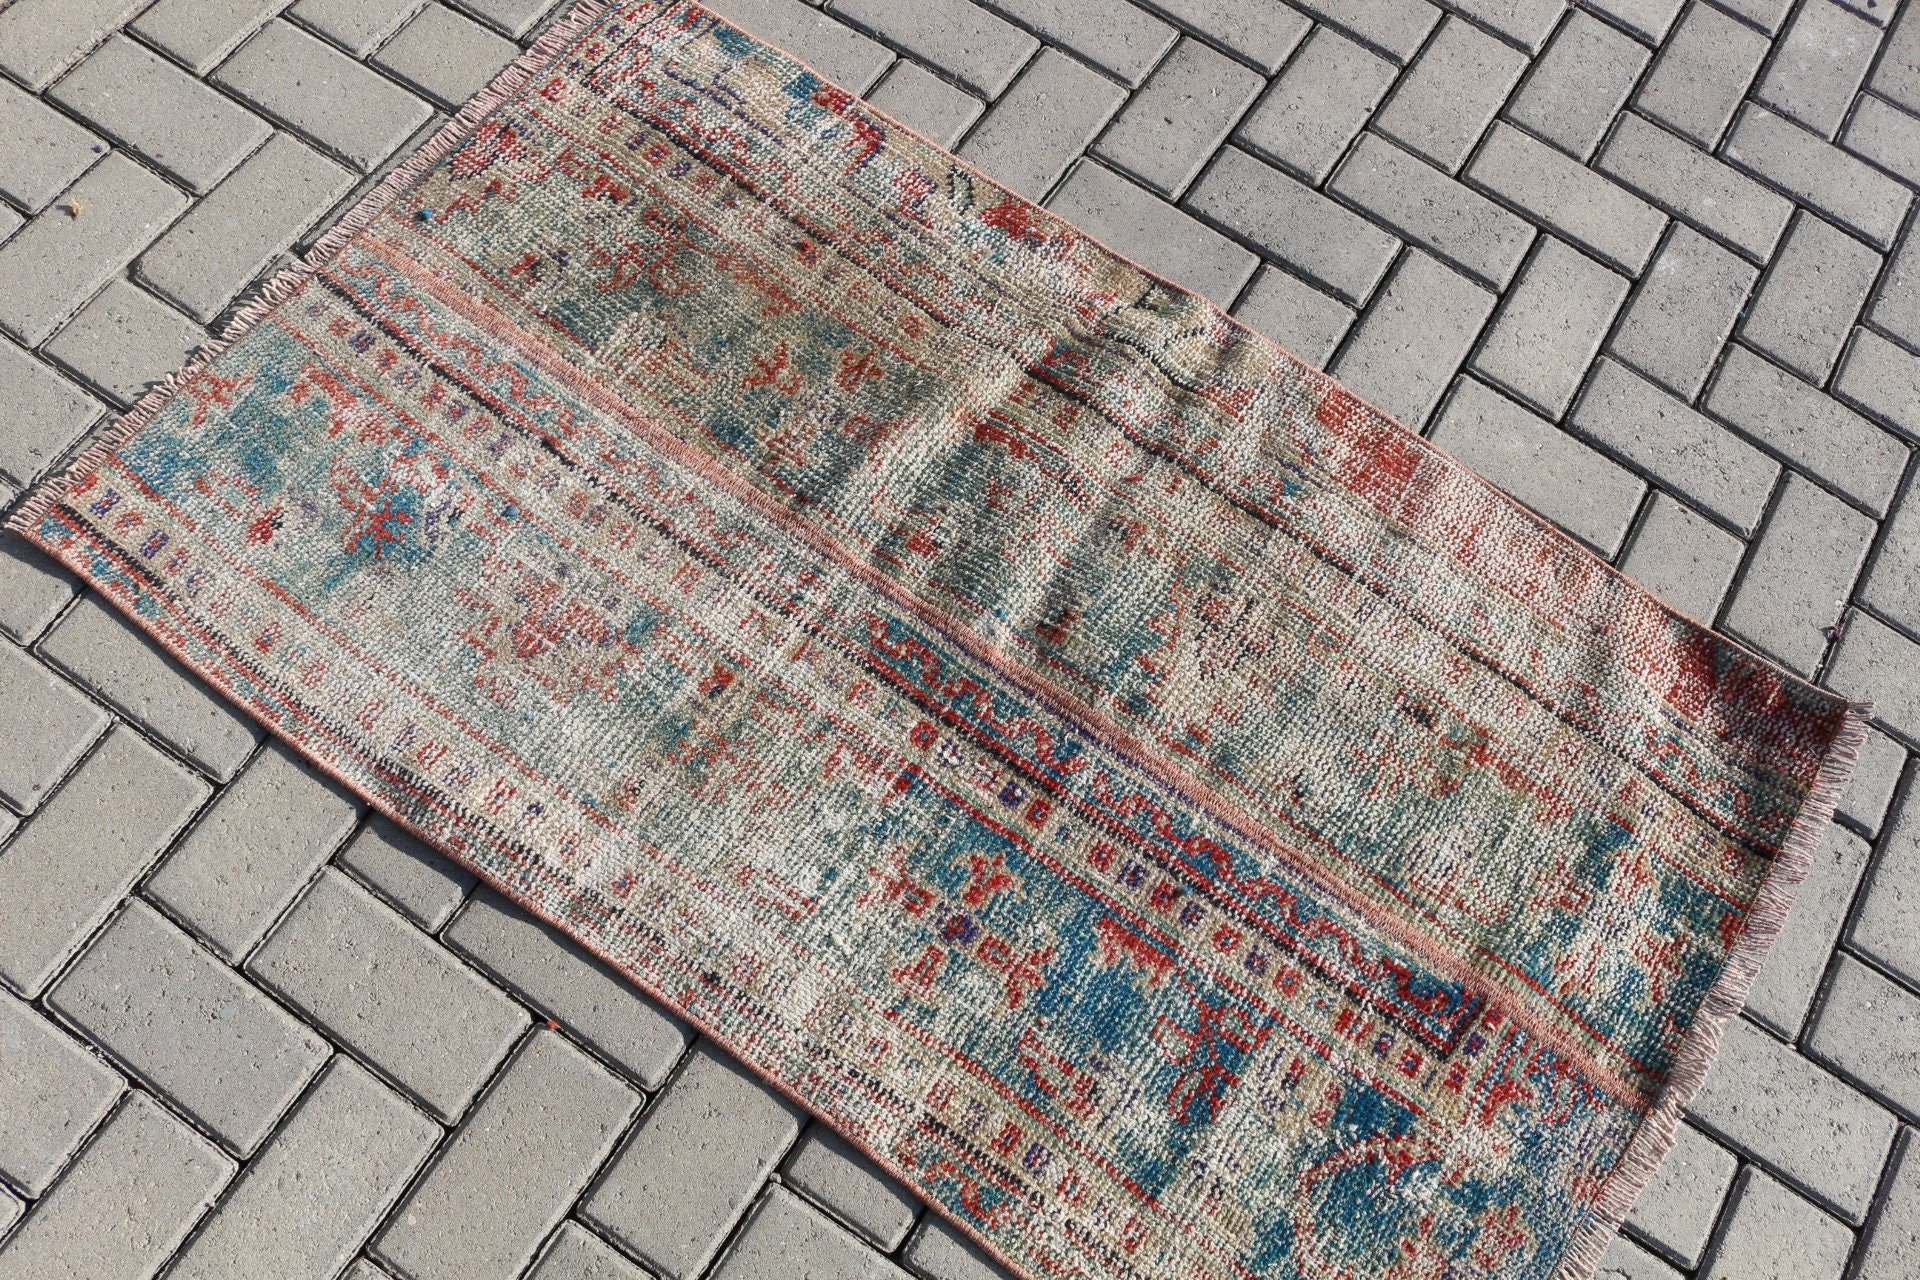 Blue Home Decor Rugs, Entry Rug, Vintage Rugs, 2.6x4.2 ft Small Rugs, Antique Rug, Turkish Rugs, Natural Rugs, Wall Hanging Rug, Floor Rugs